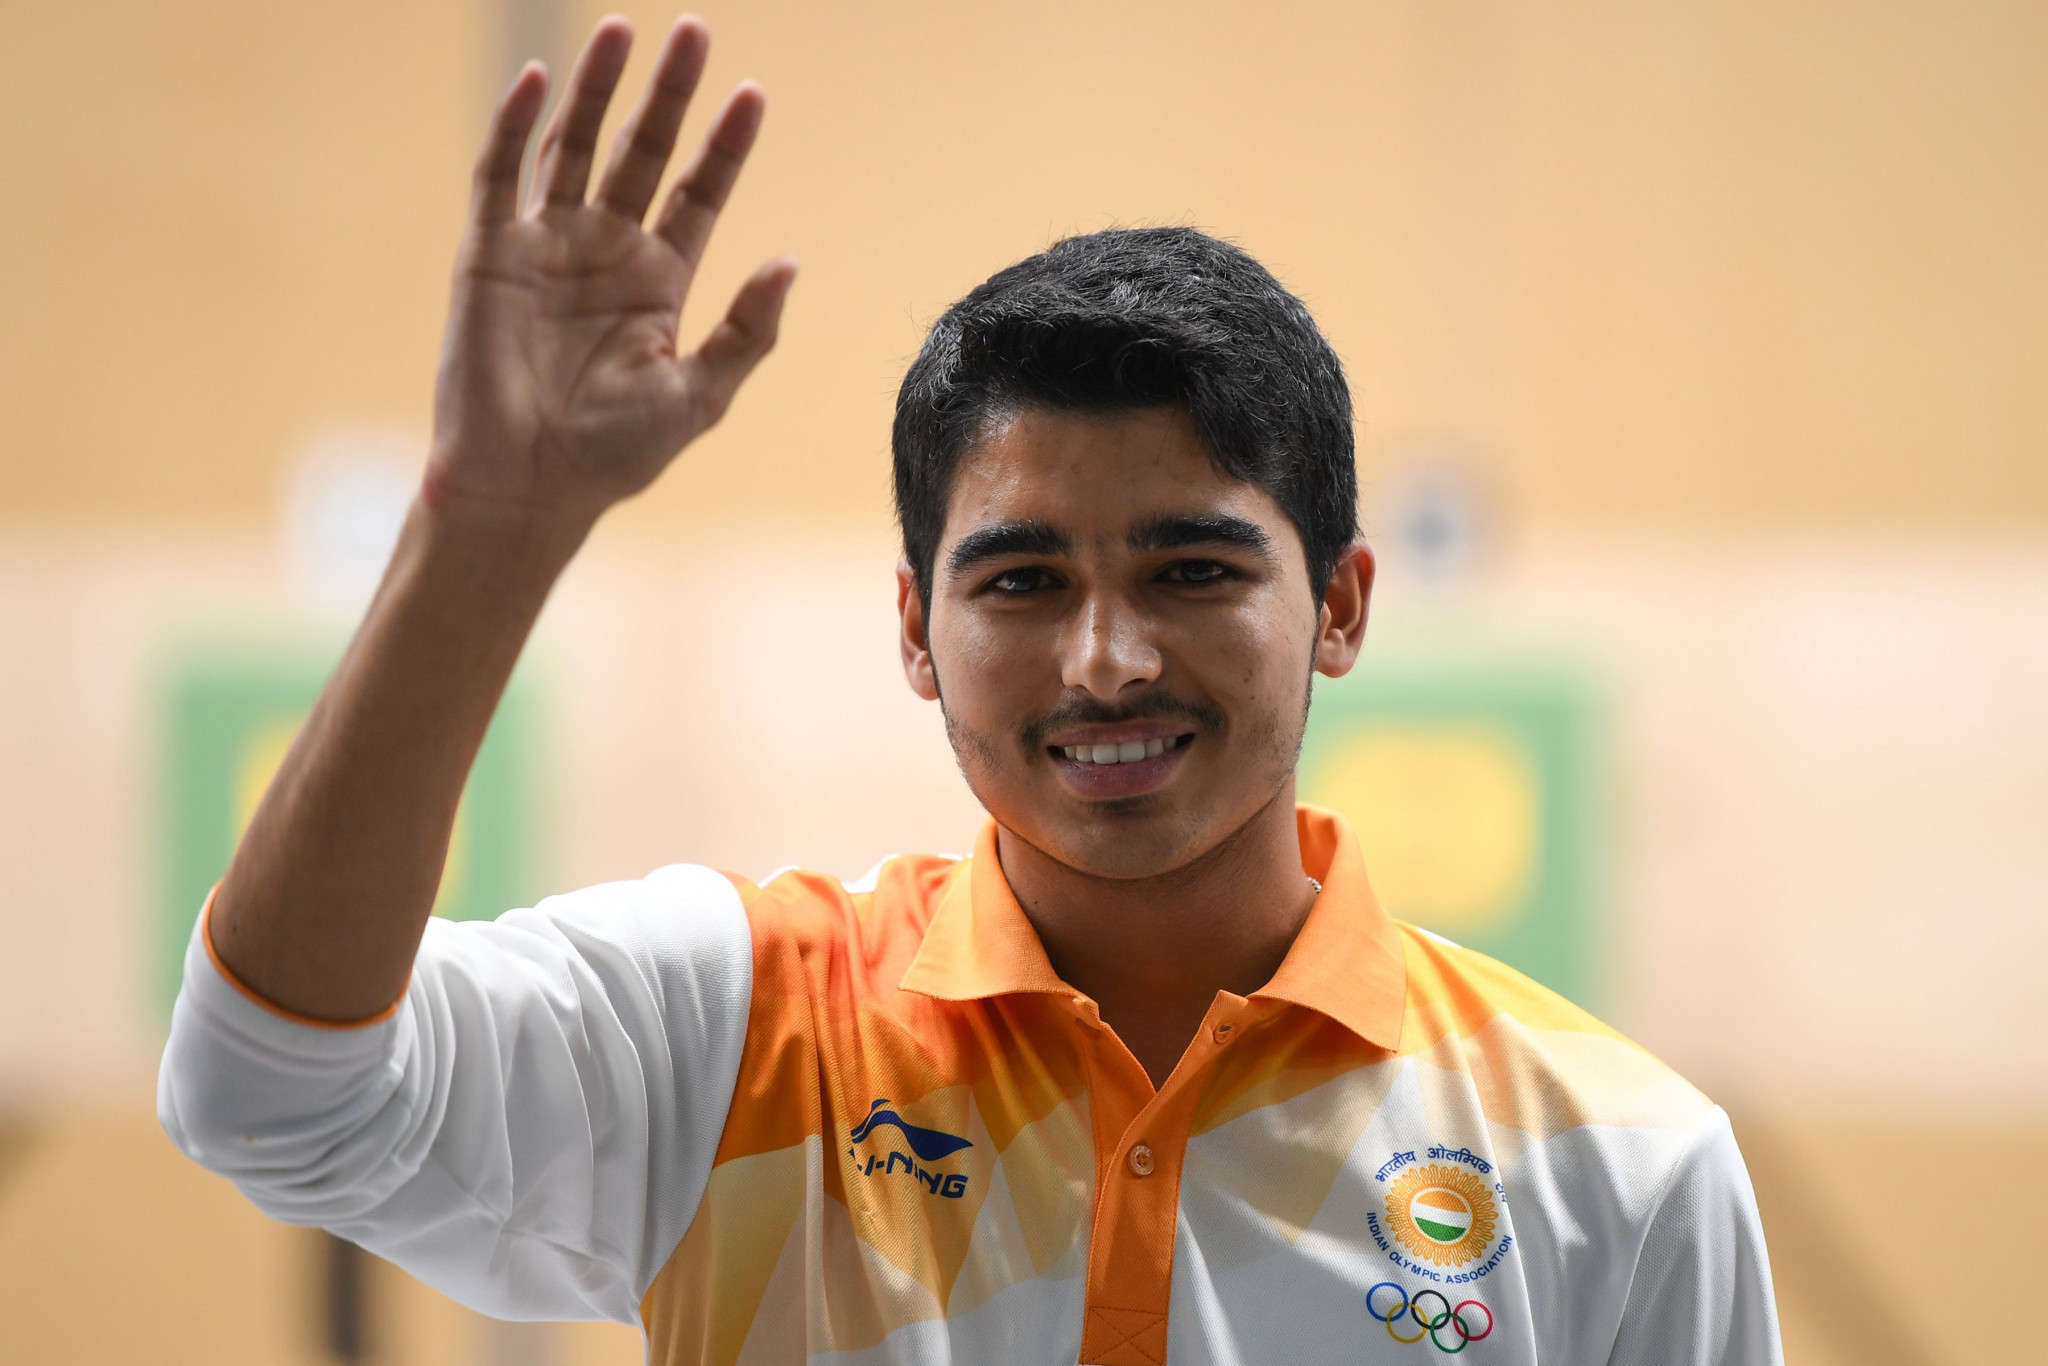 Saurabh Chaudhary has earned Asian Games and Youth Olympic titles in a productive couple of months ©Getty Images